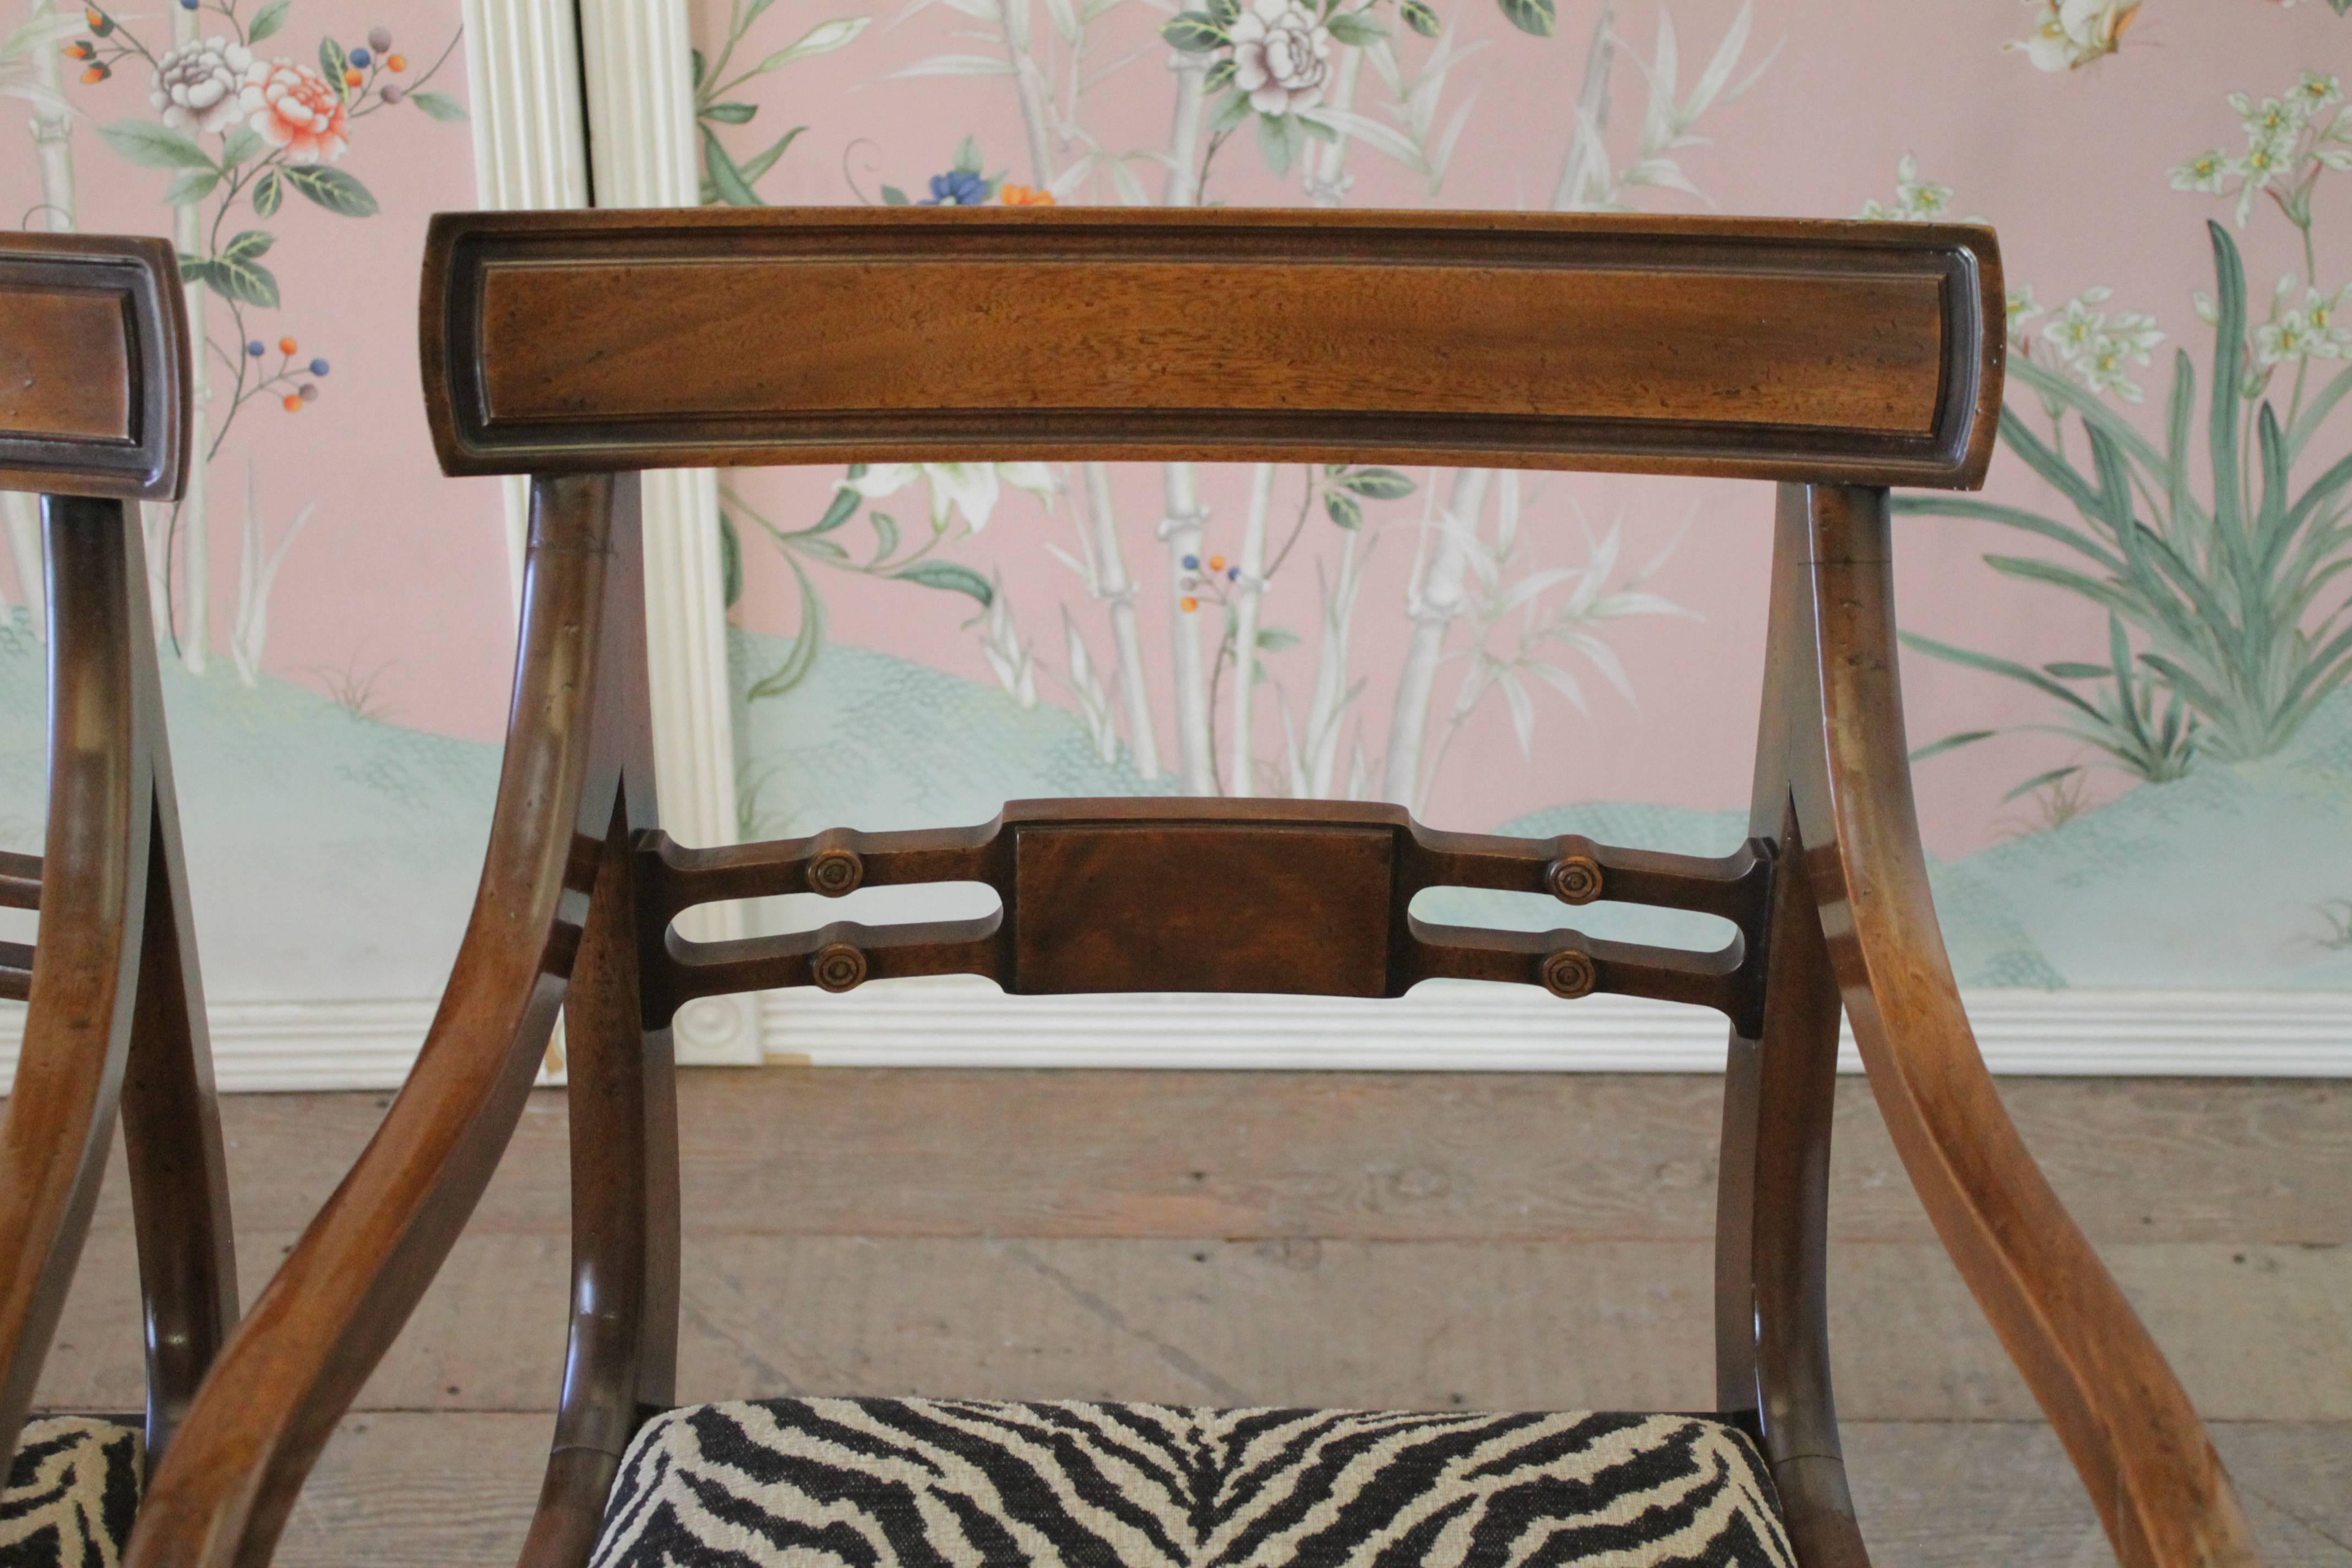 Pair of mahogany wood open armchairs with zebra fabric.
Good condition, sturdy, fabric is clean.
Measures: 20